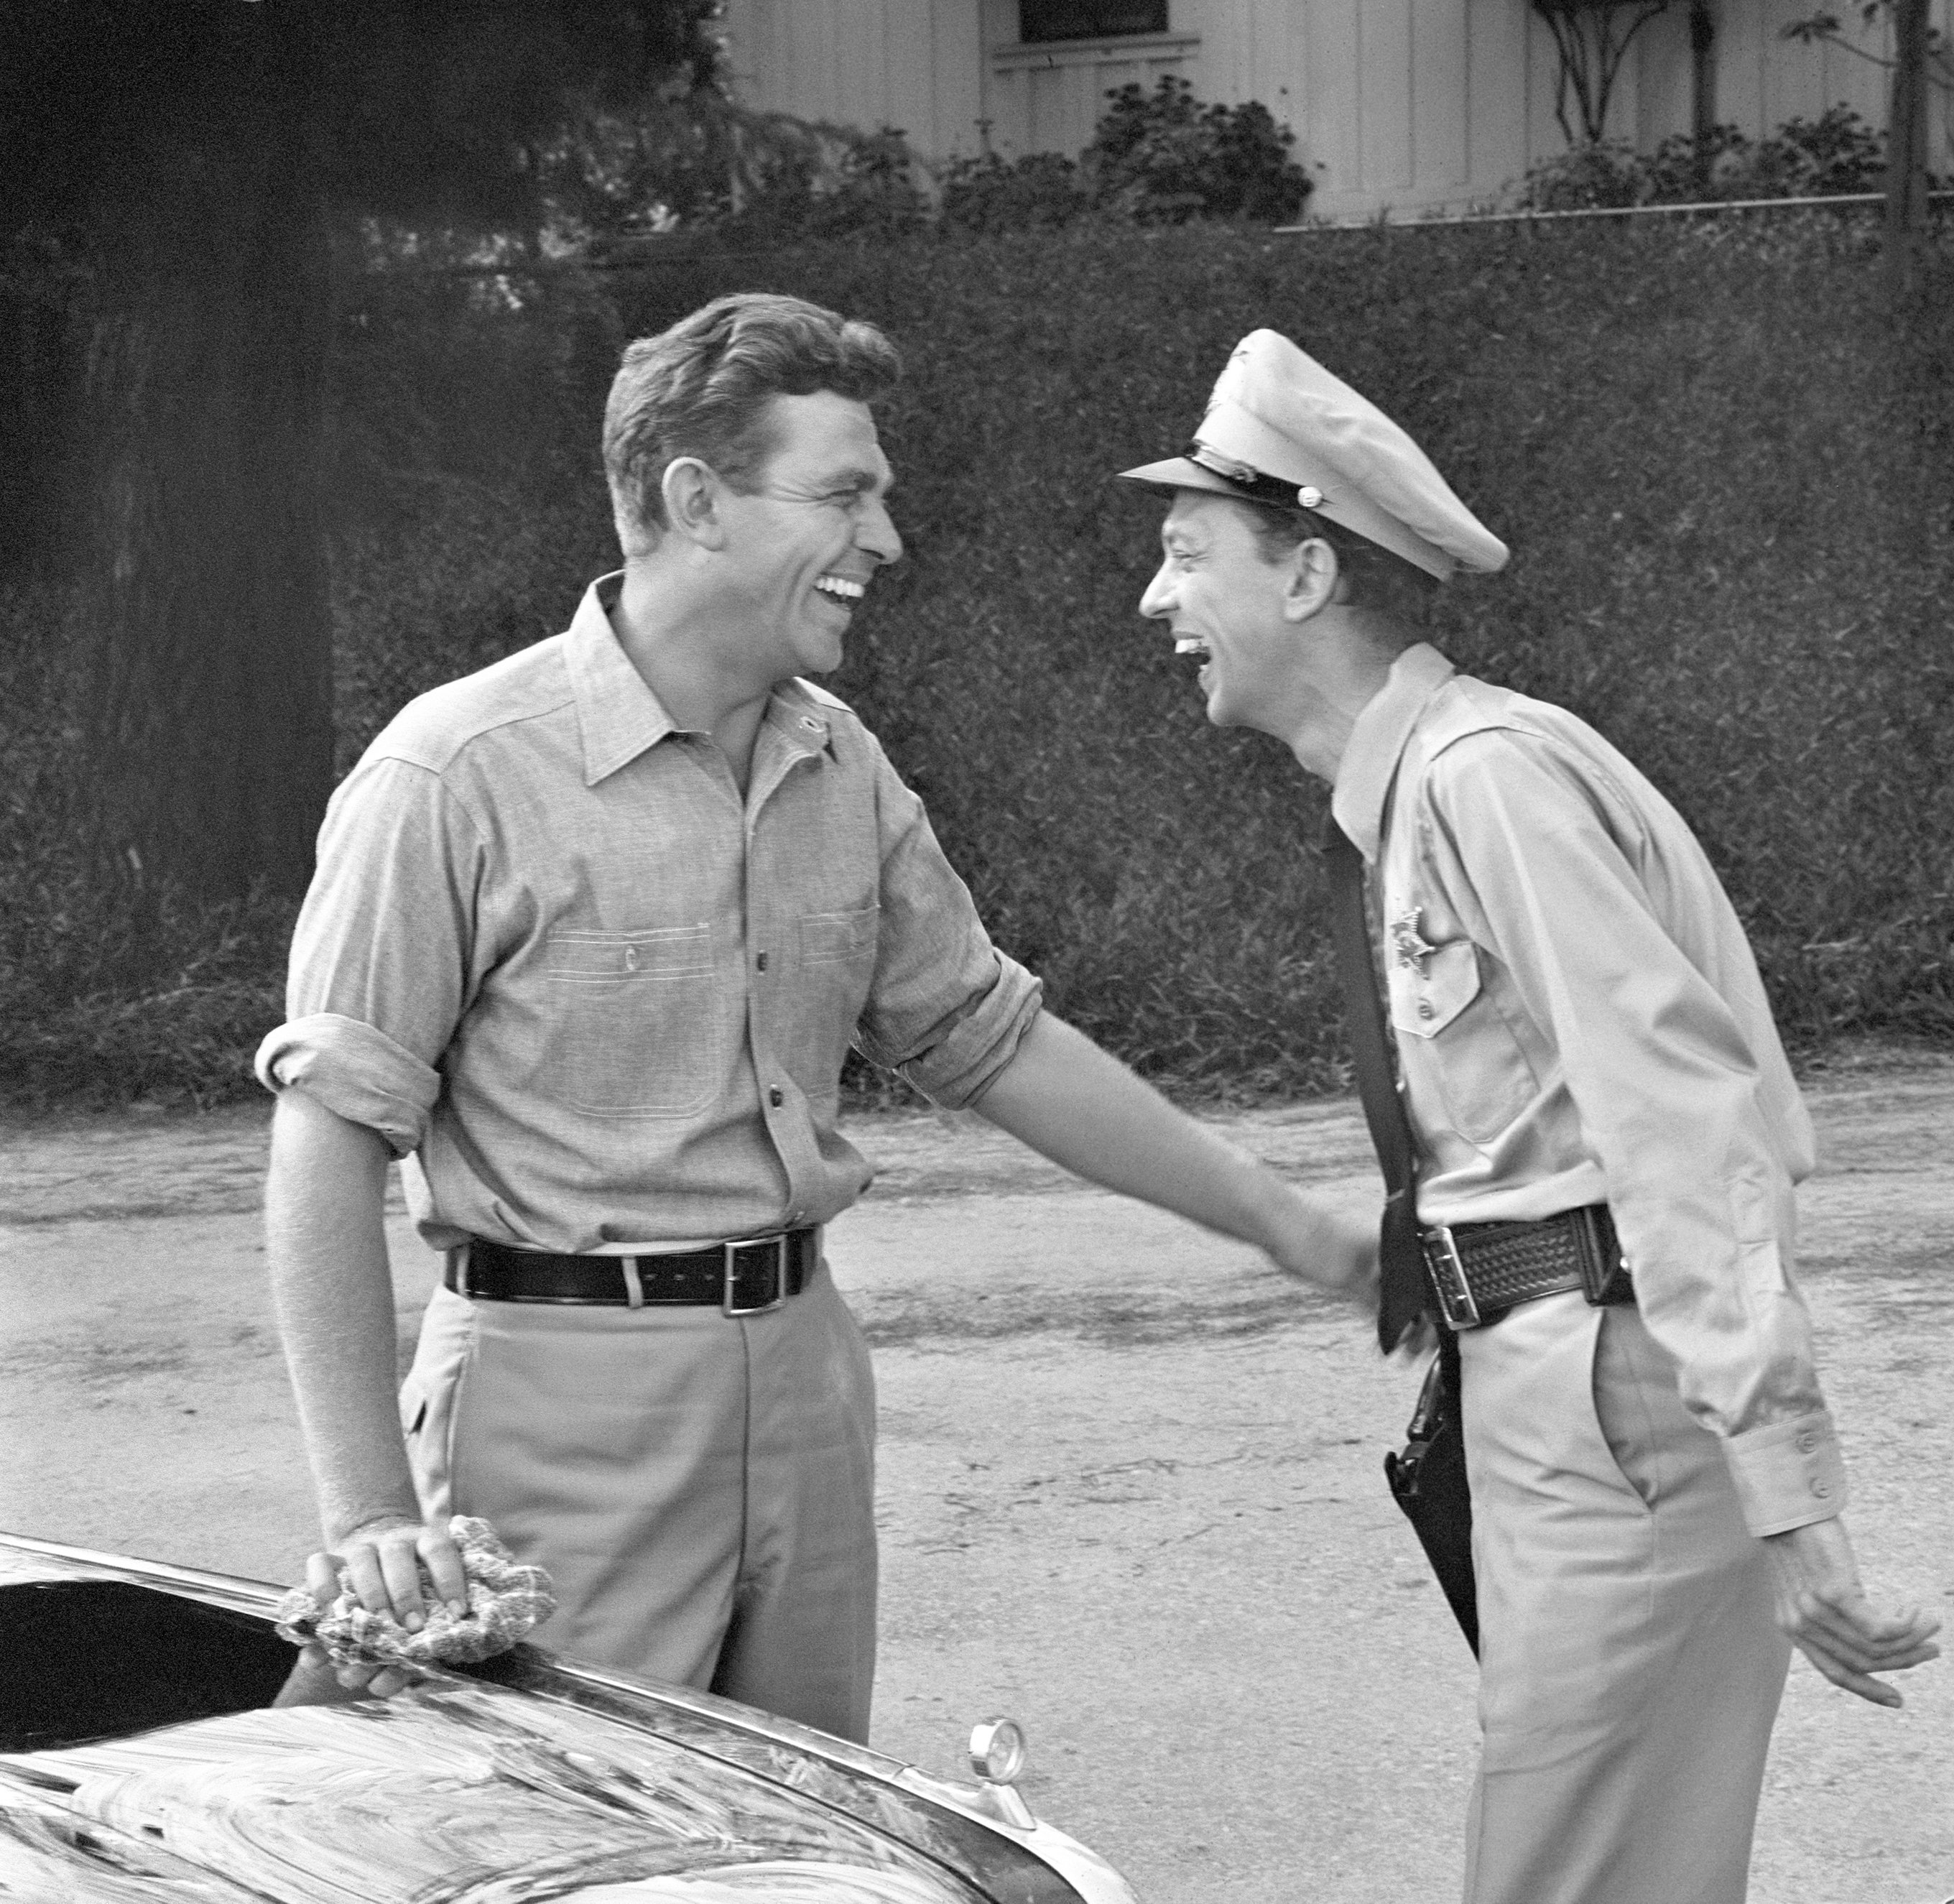 Don Knotts (right) with Andy Griffith